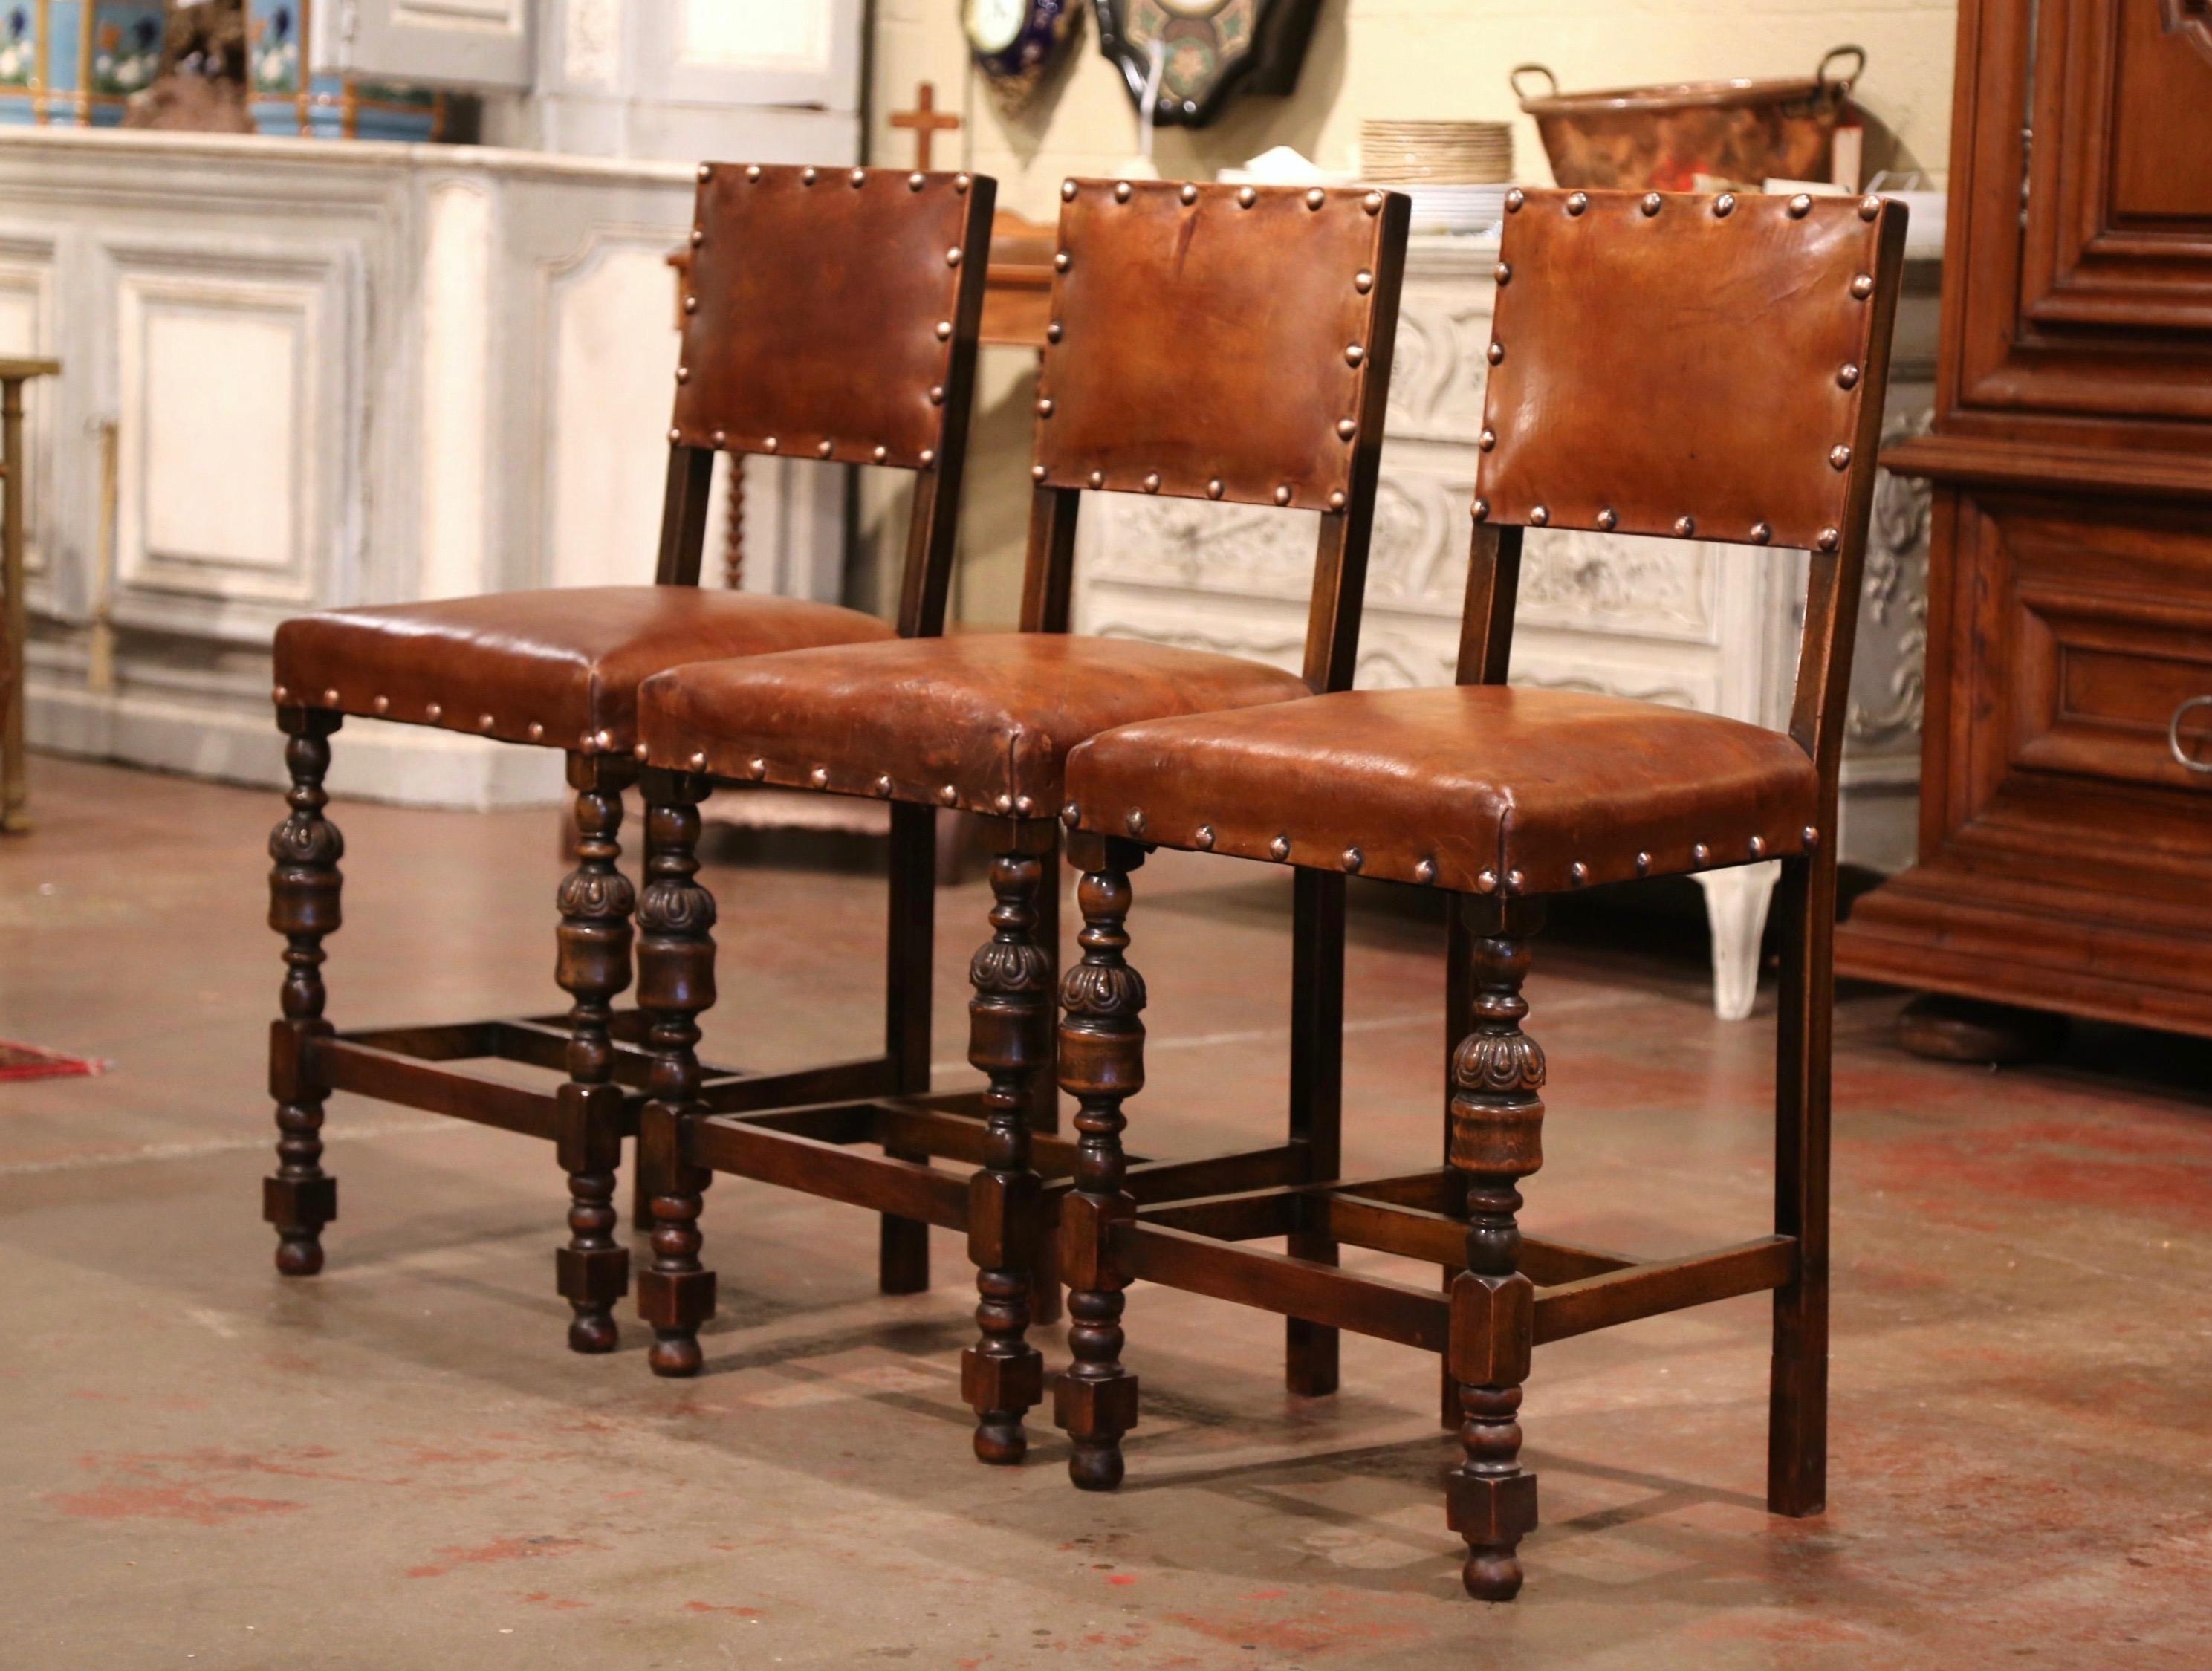 Add a Gothic look to your bar or kitchen counter with this elegant set of antique stools. Crafted in France circa 1880, the traditional Henri II style bar stools are the perfect height for a 36 to 38